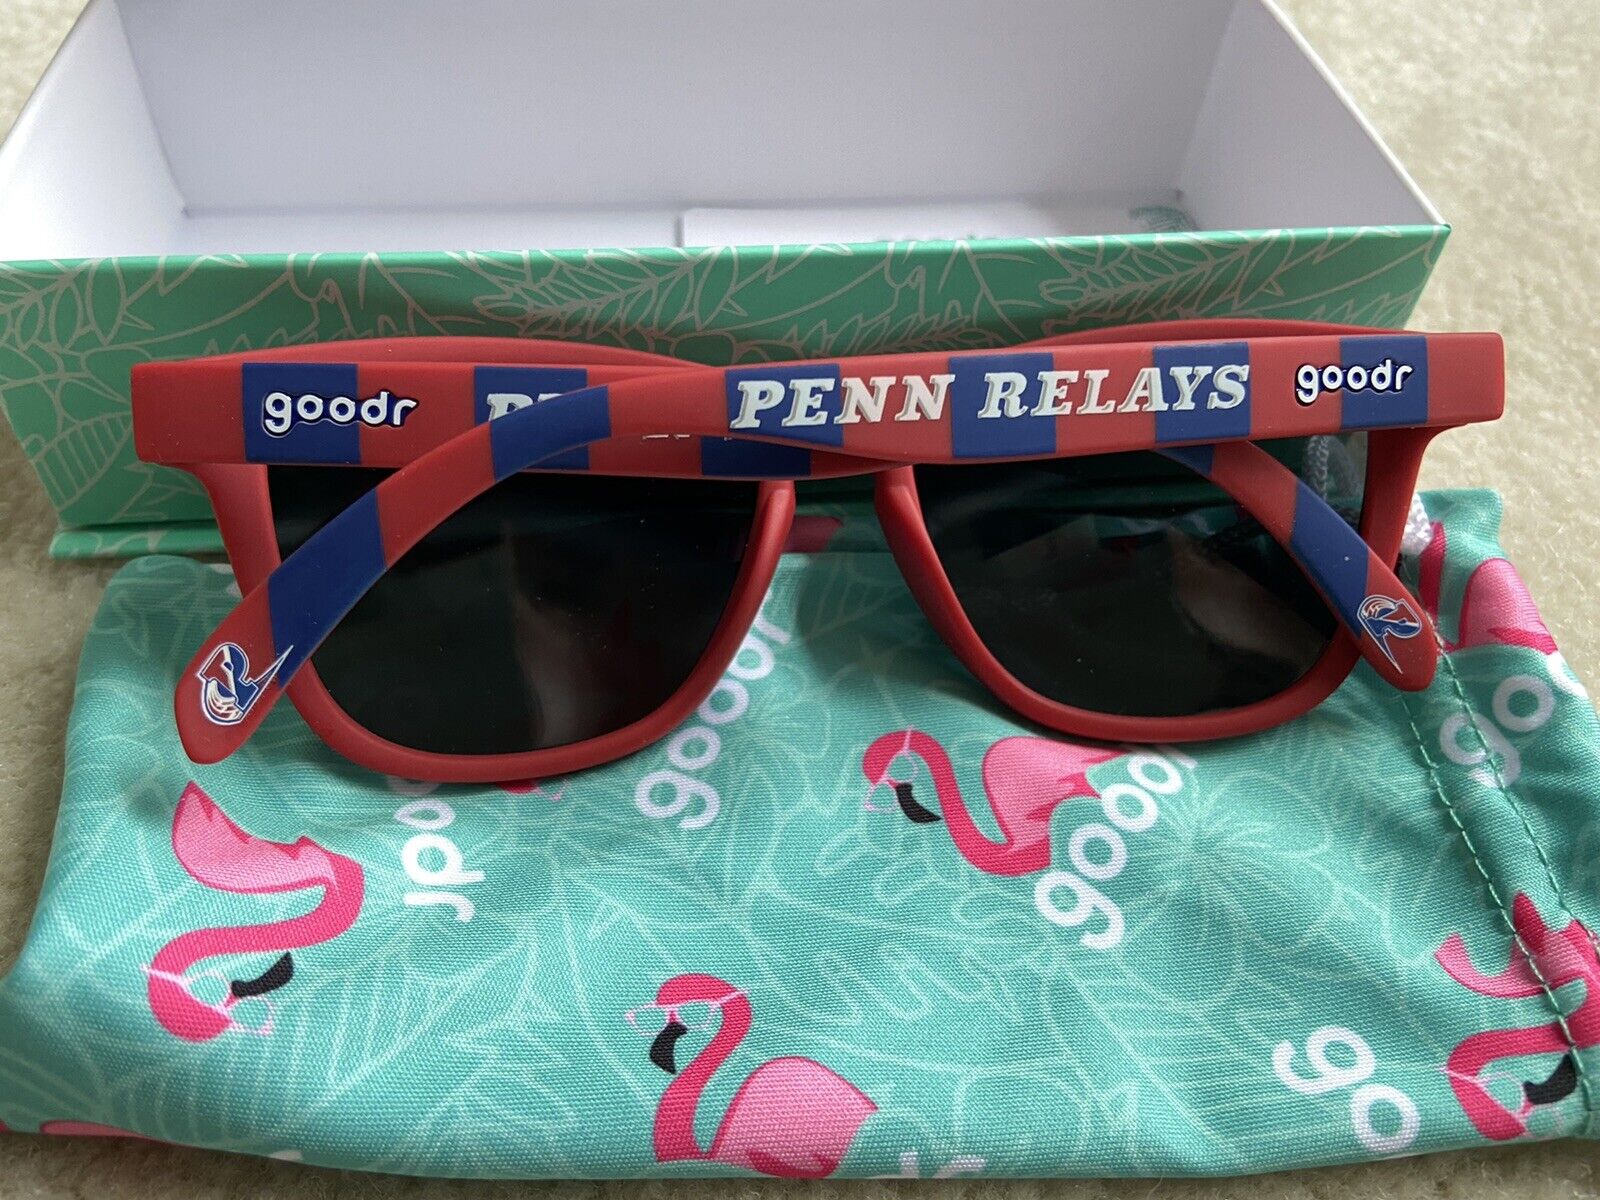 New! Limited Edition Exclusive 2022 Penn Relays Goodr Sunglasses Track & Field